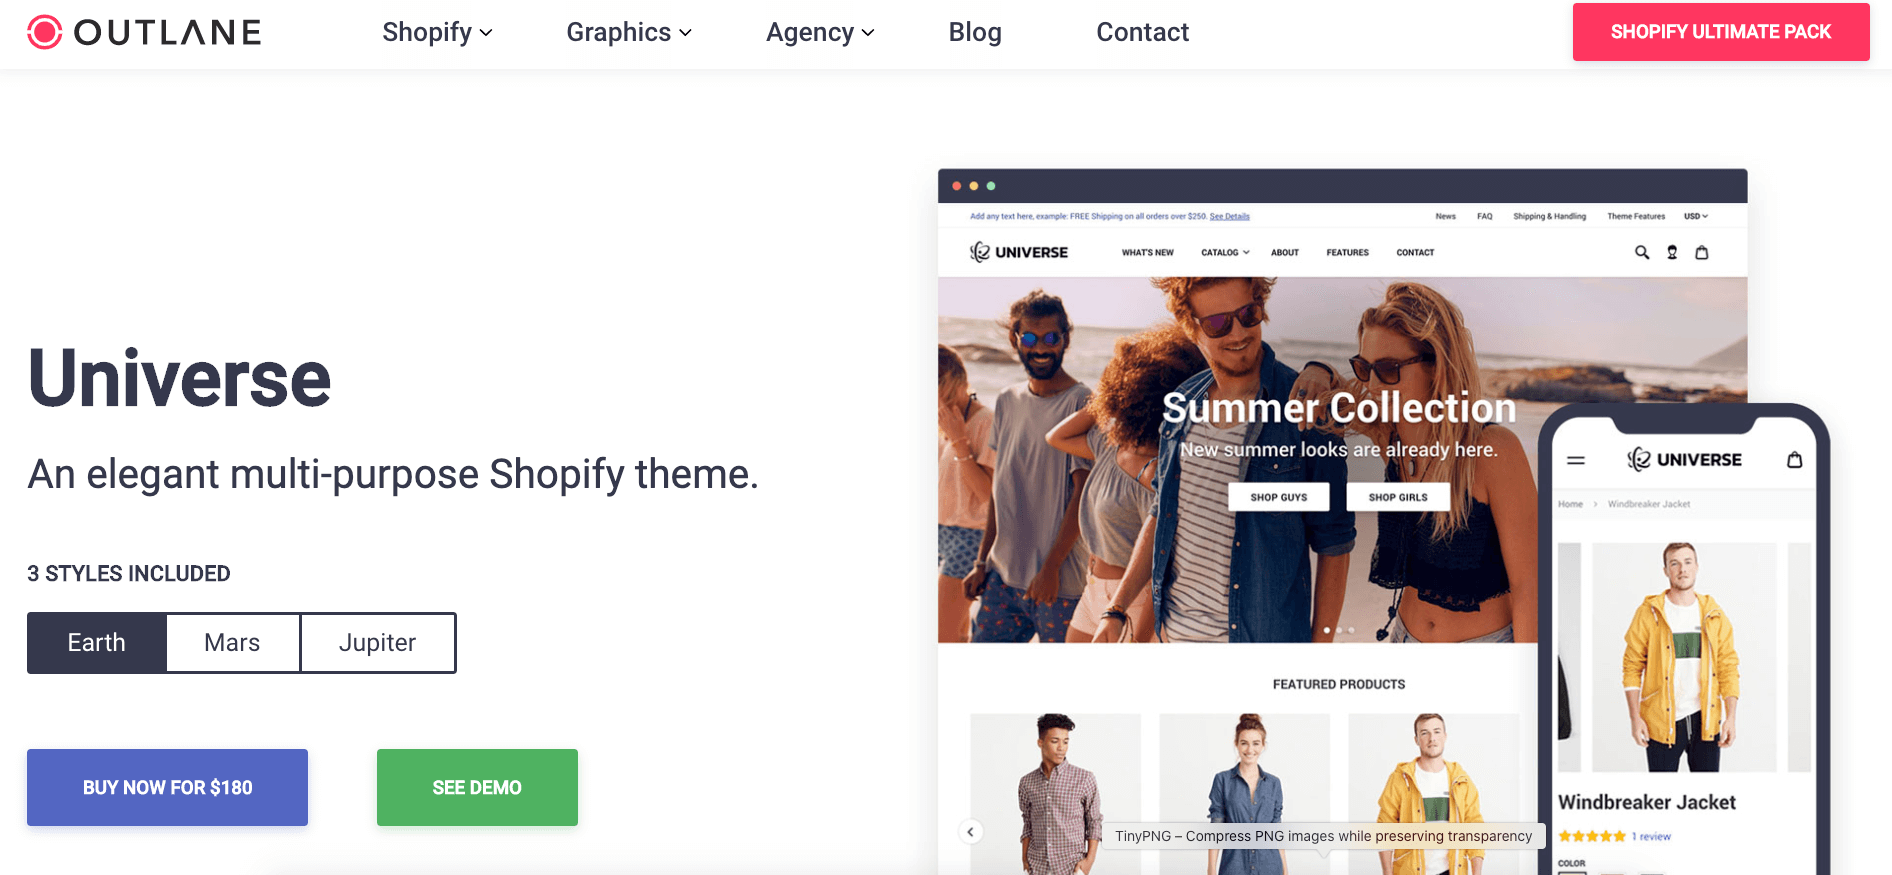 Outlane Universe Theme Best Shopify Themes for Dropshipping